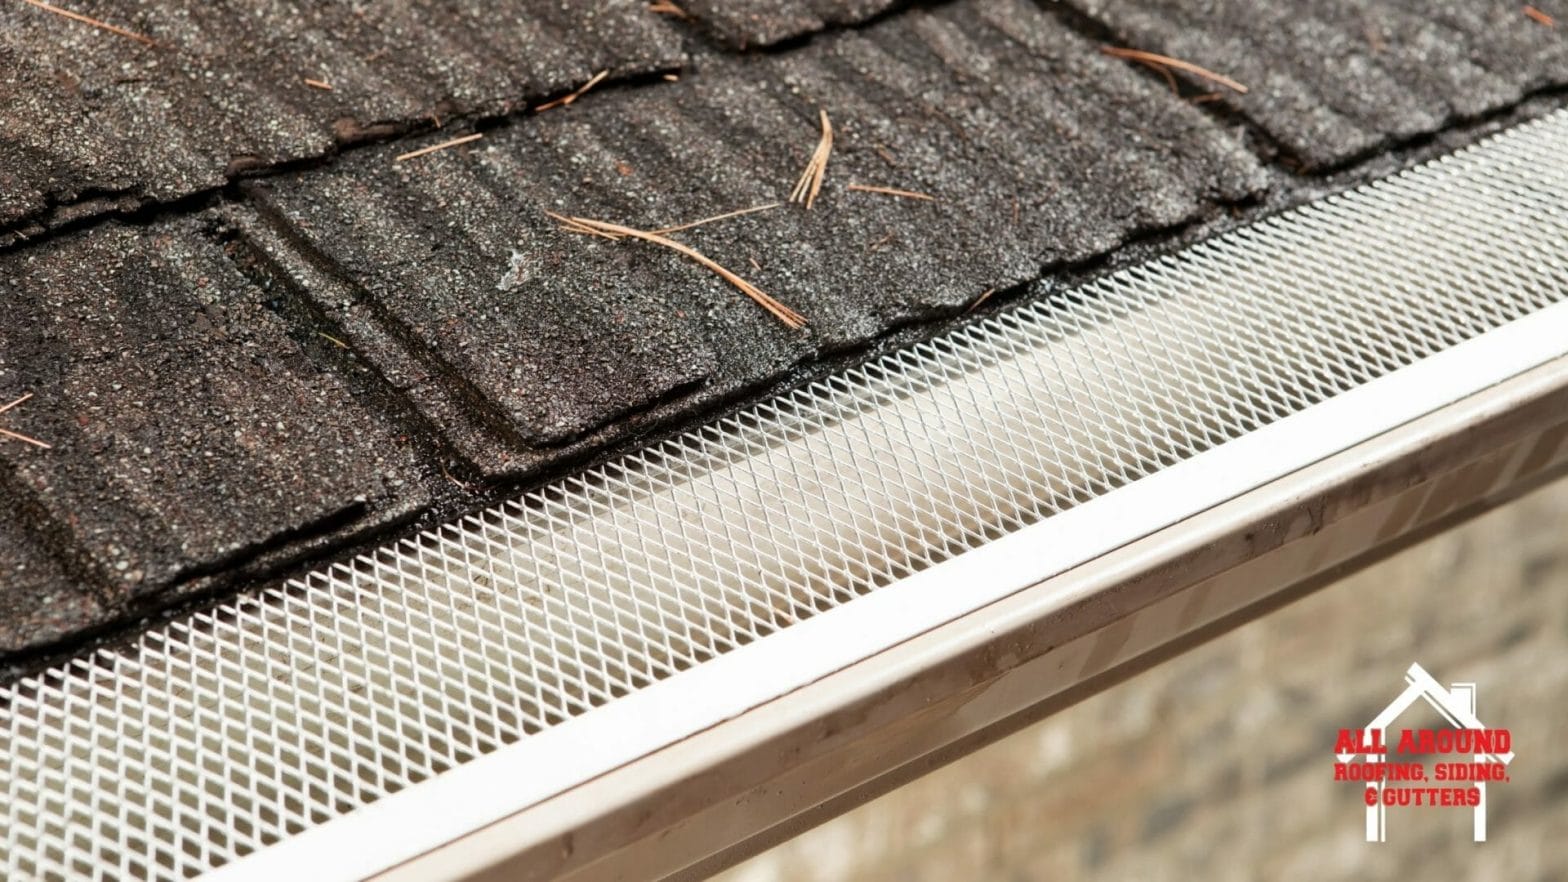 Are Gutter Guards Worth It In 2022?